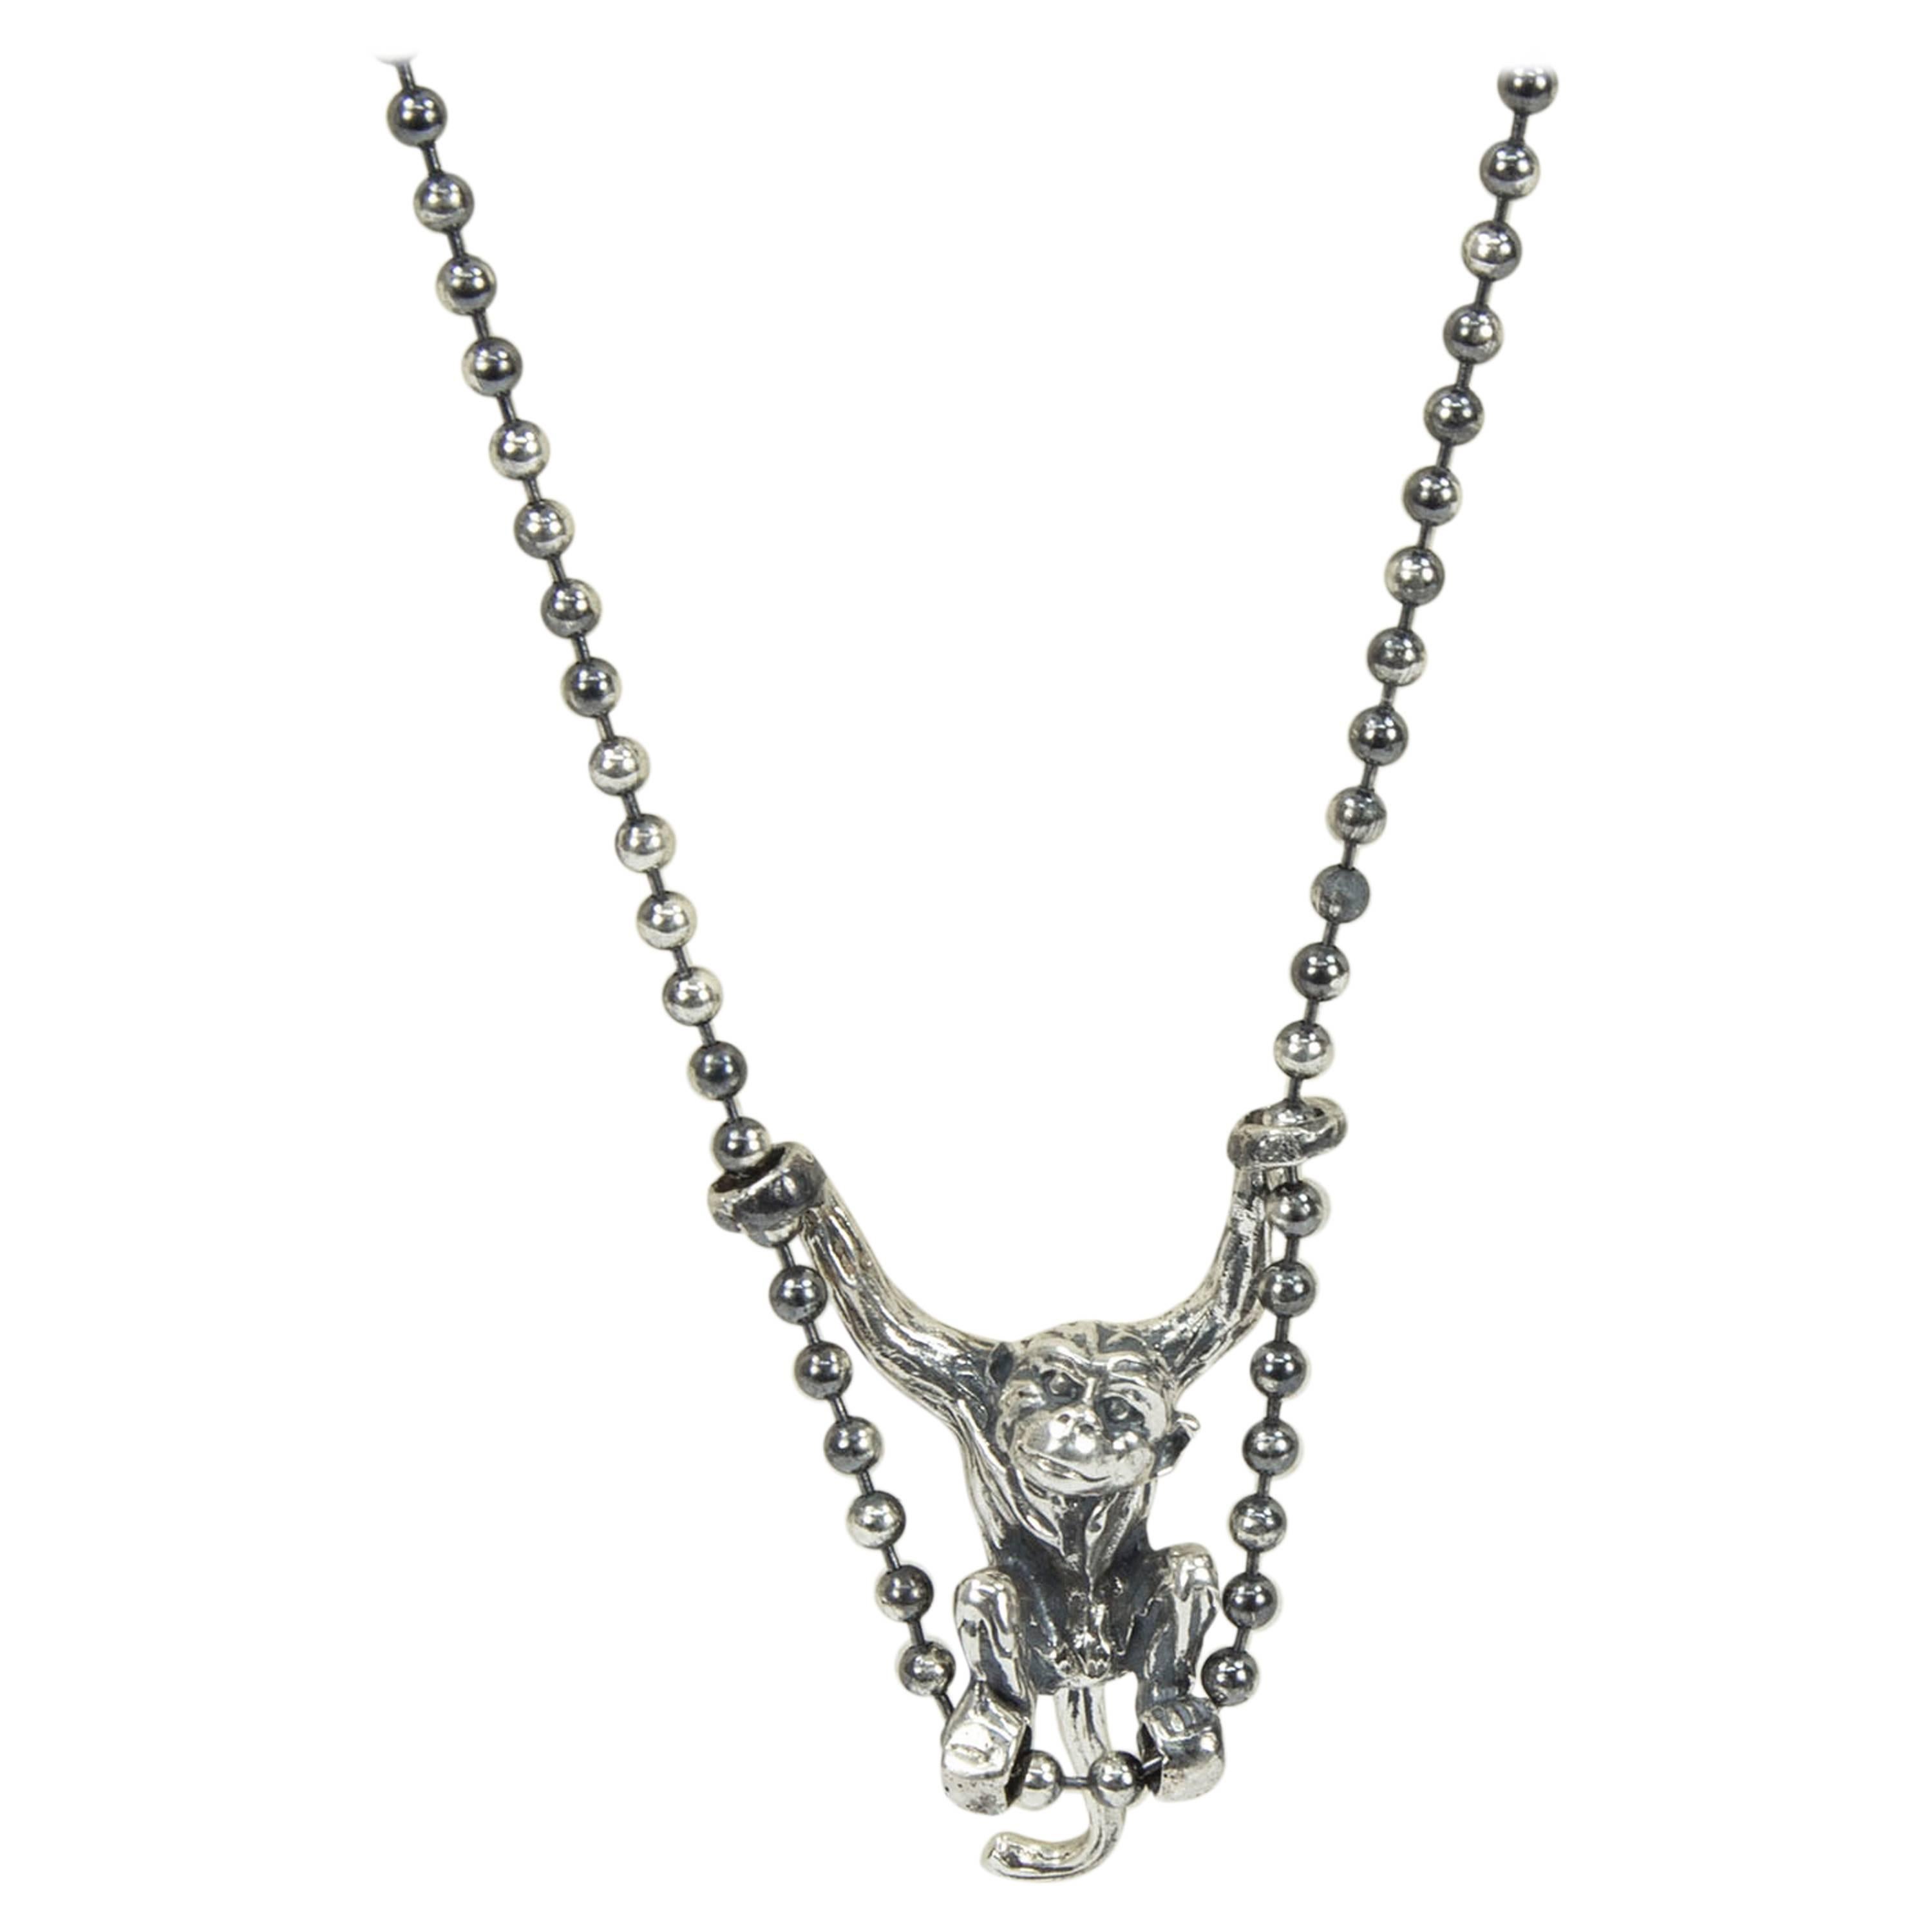 Swinging Sterling Silver Monkey on Long Ball Chain Necklace